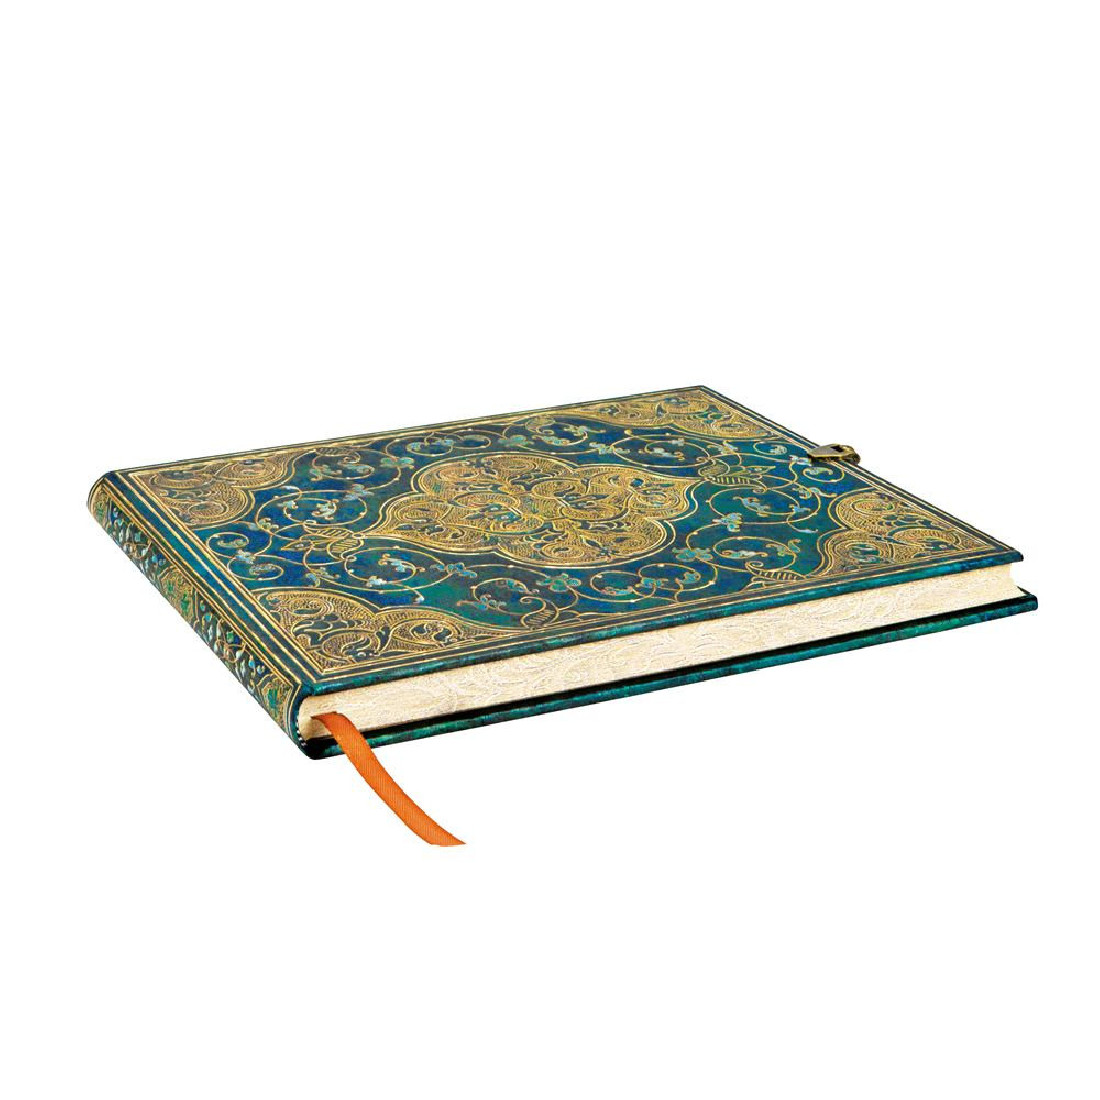 Paperblanks Turquoise Chronicles Guest Book Unlined notebook